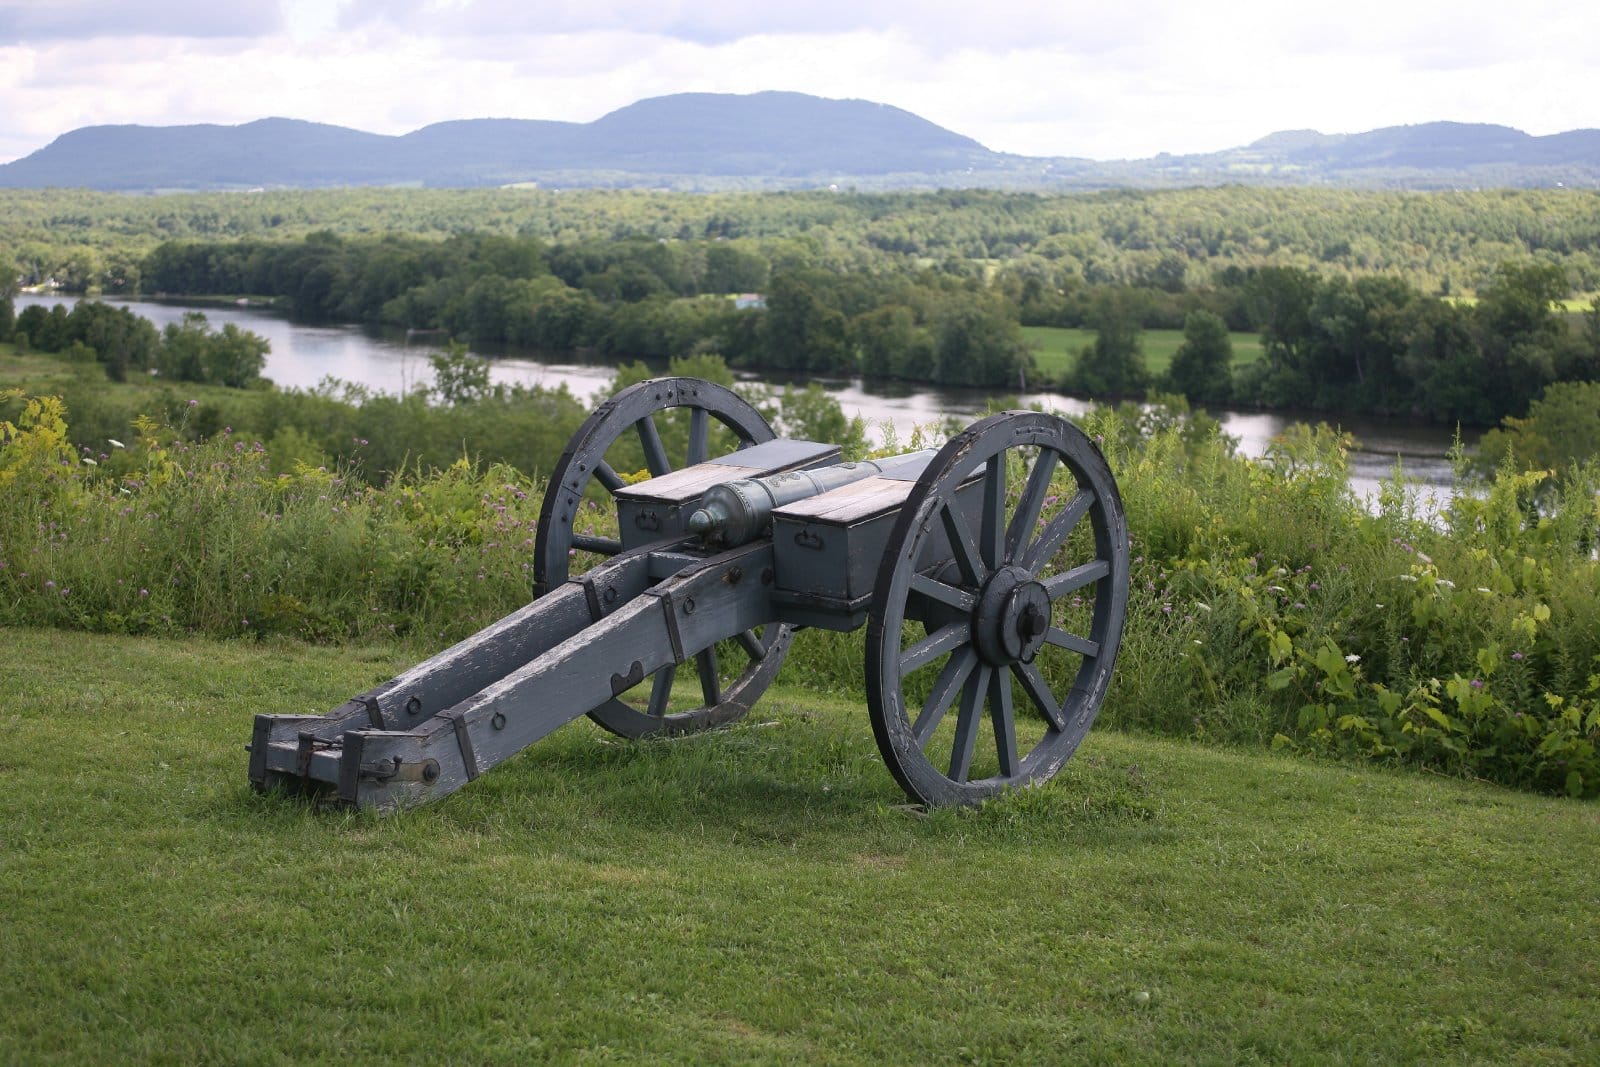 <p class="wp-caption-text">Image Credit: Shutterstock / Dennis W Donohue</p>  <p>Site of the Battle of Saratoga, this park commemorates the decisive victory that proved to be the turning point of the Revolutionary War, convincing France to recognize and support the United States.</p>